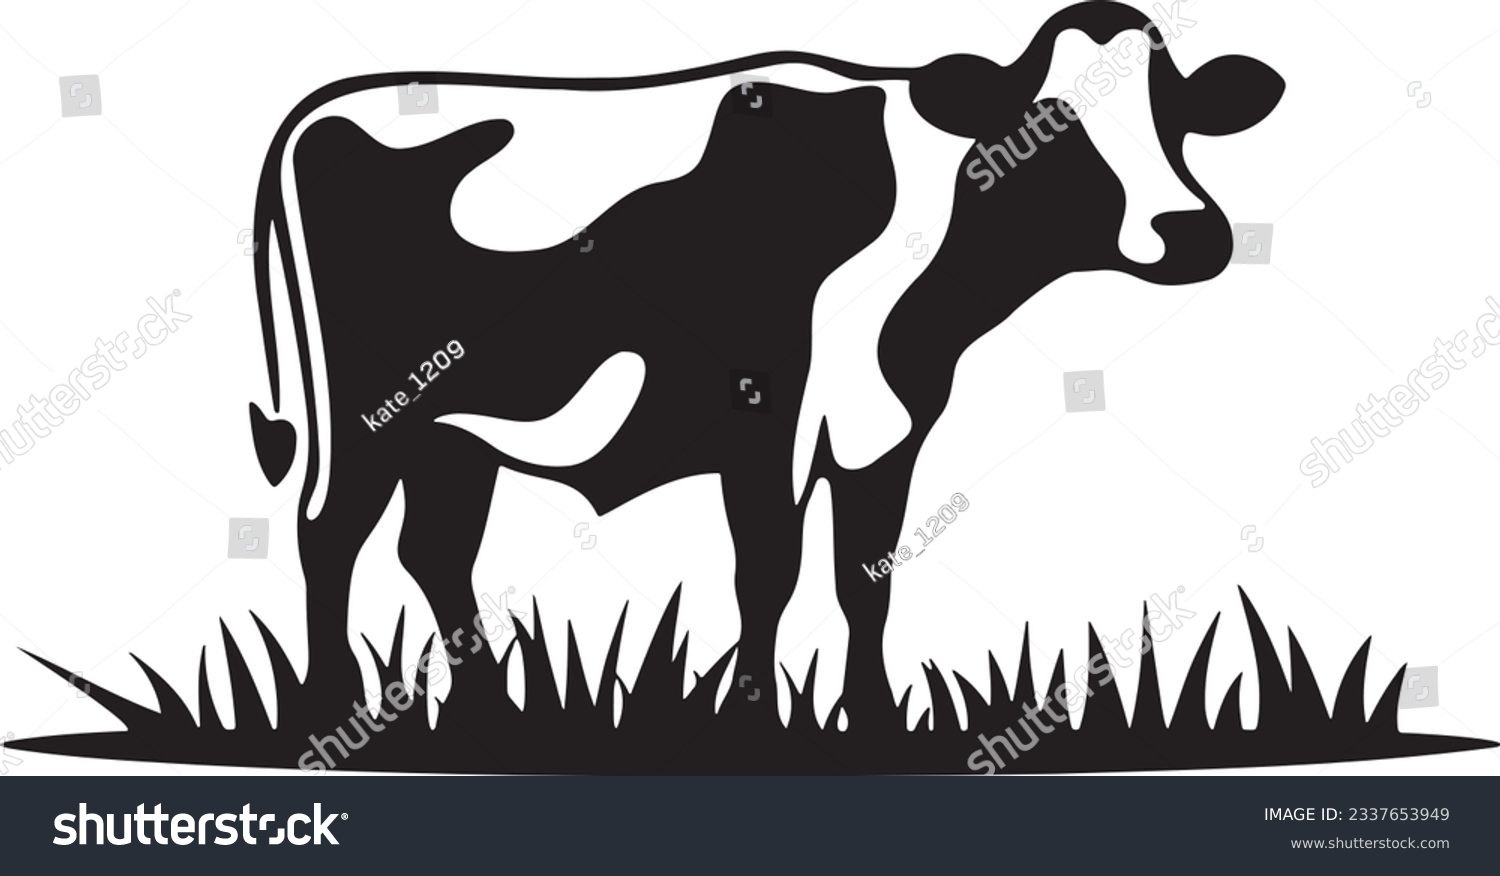 SVG of Cow grazing in a field, Basic simple Minimalist vector SVG graphic, isolated on white background, black and white svg